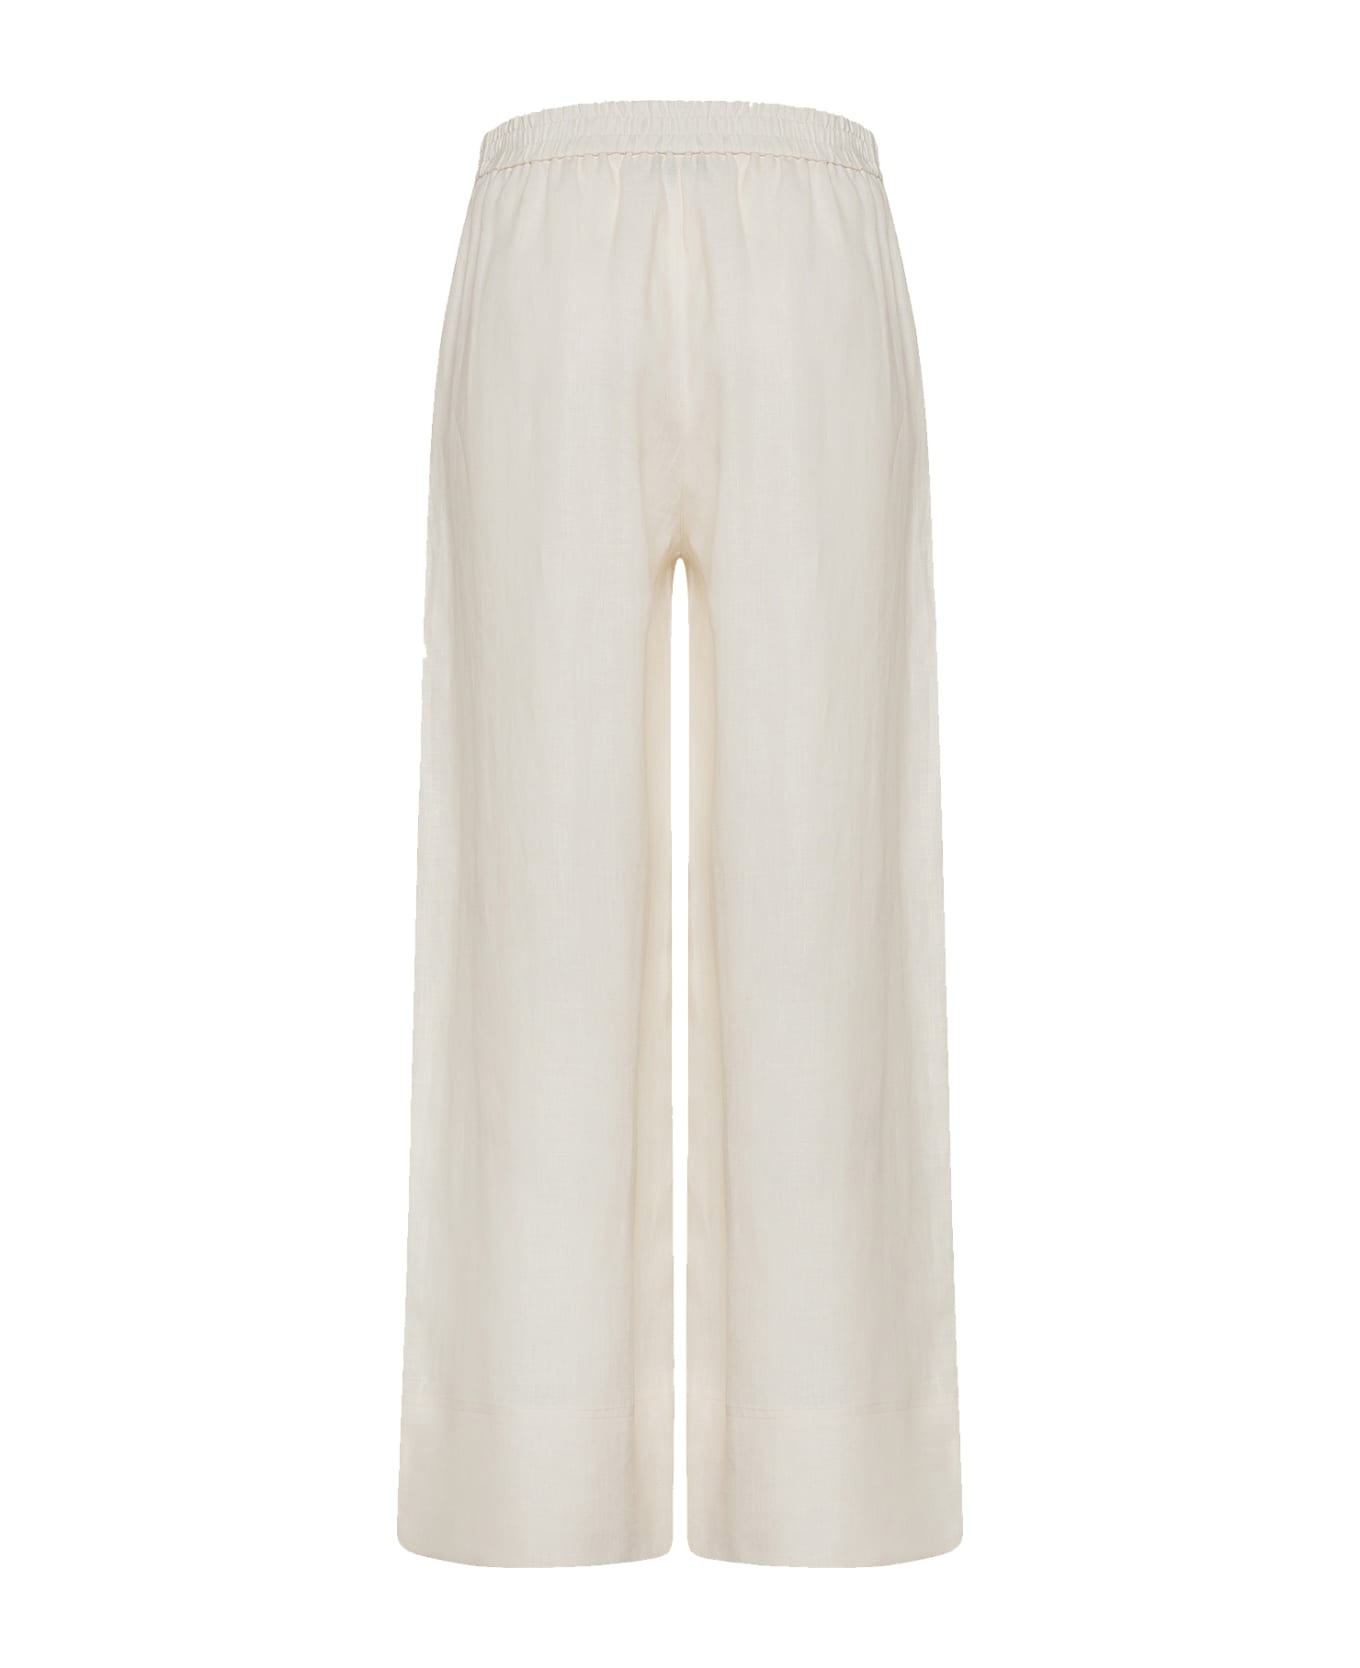 Seventy Wide White High-waisted Trousers - BEIGE ボトムス